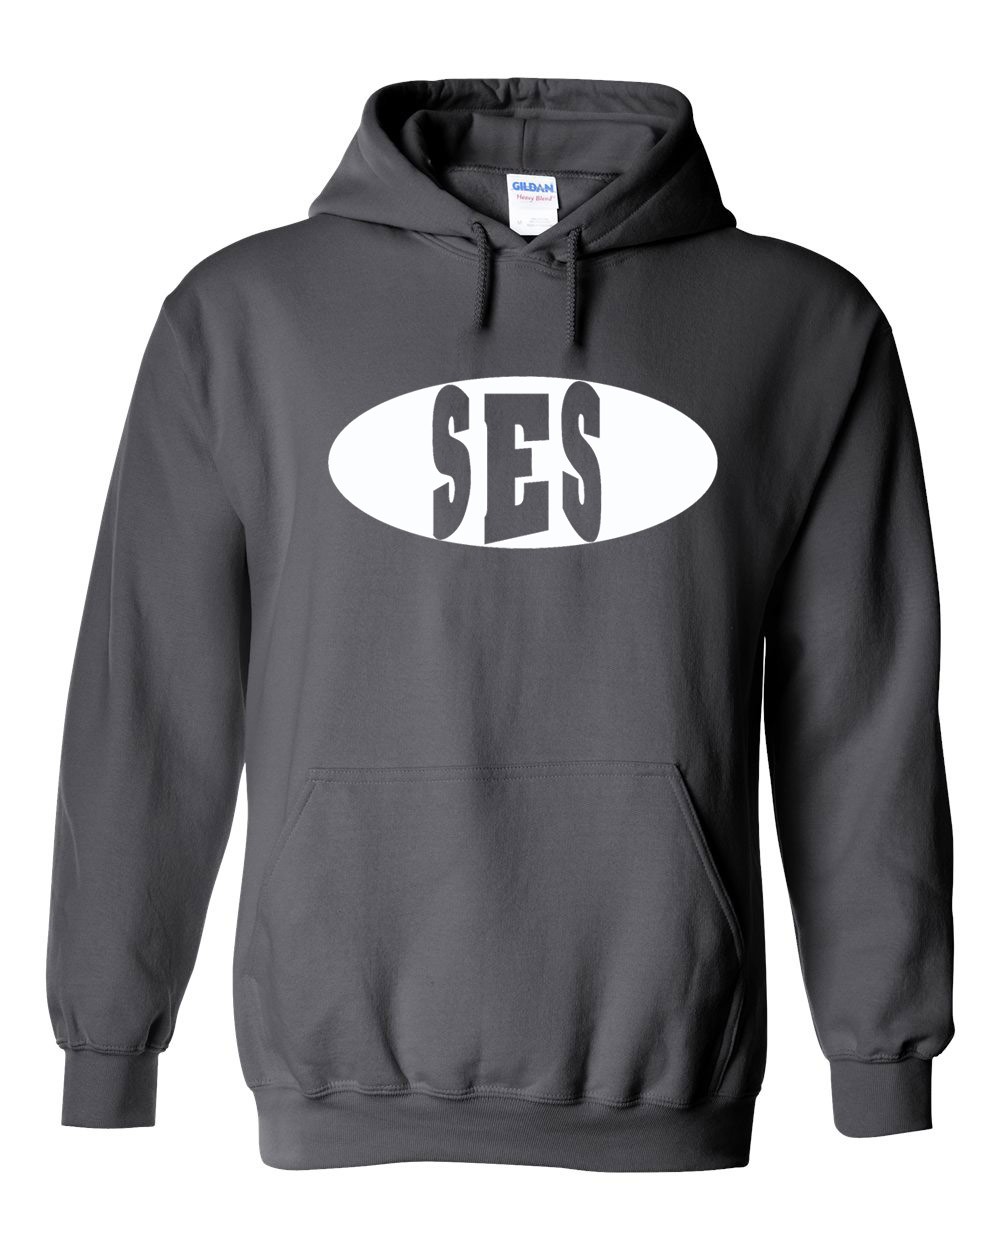 SES Spirit Pullover Hoodie w/ White Logo - Please Allow 2-3 Weeks for Delivery